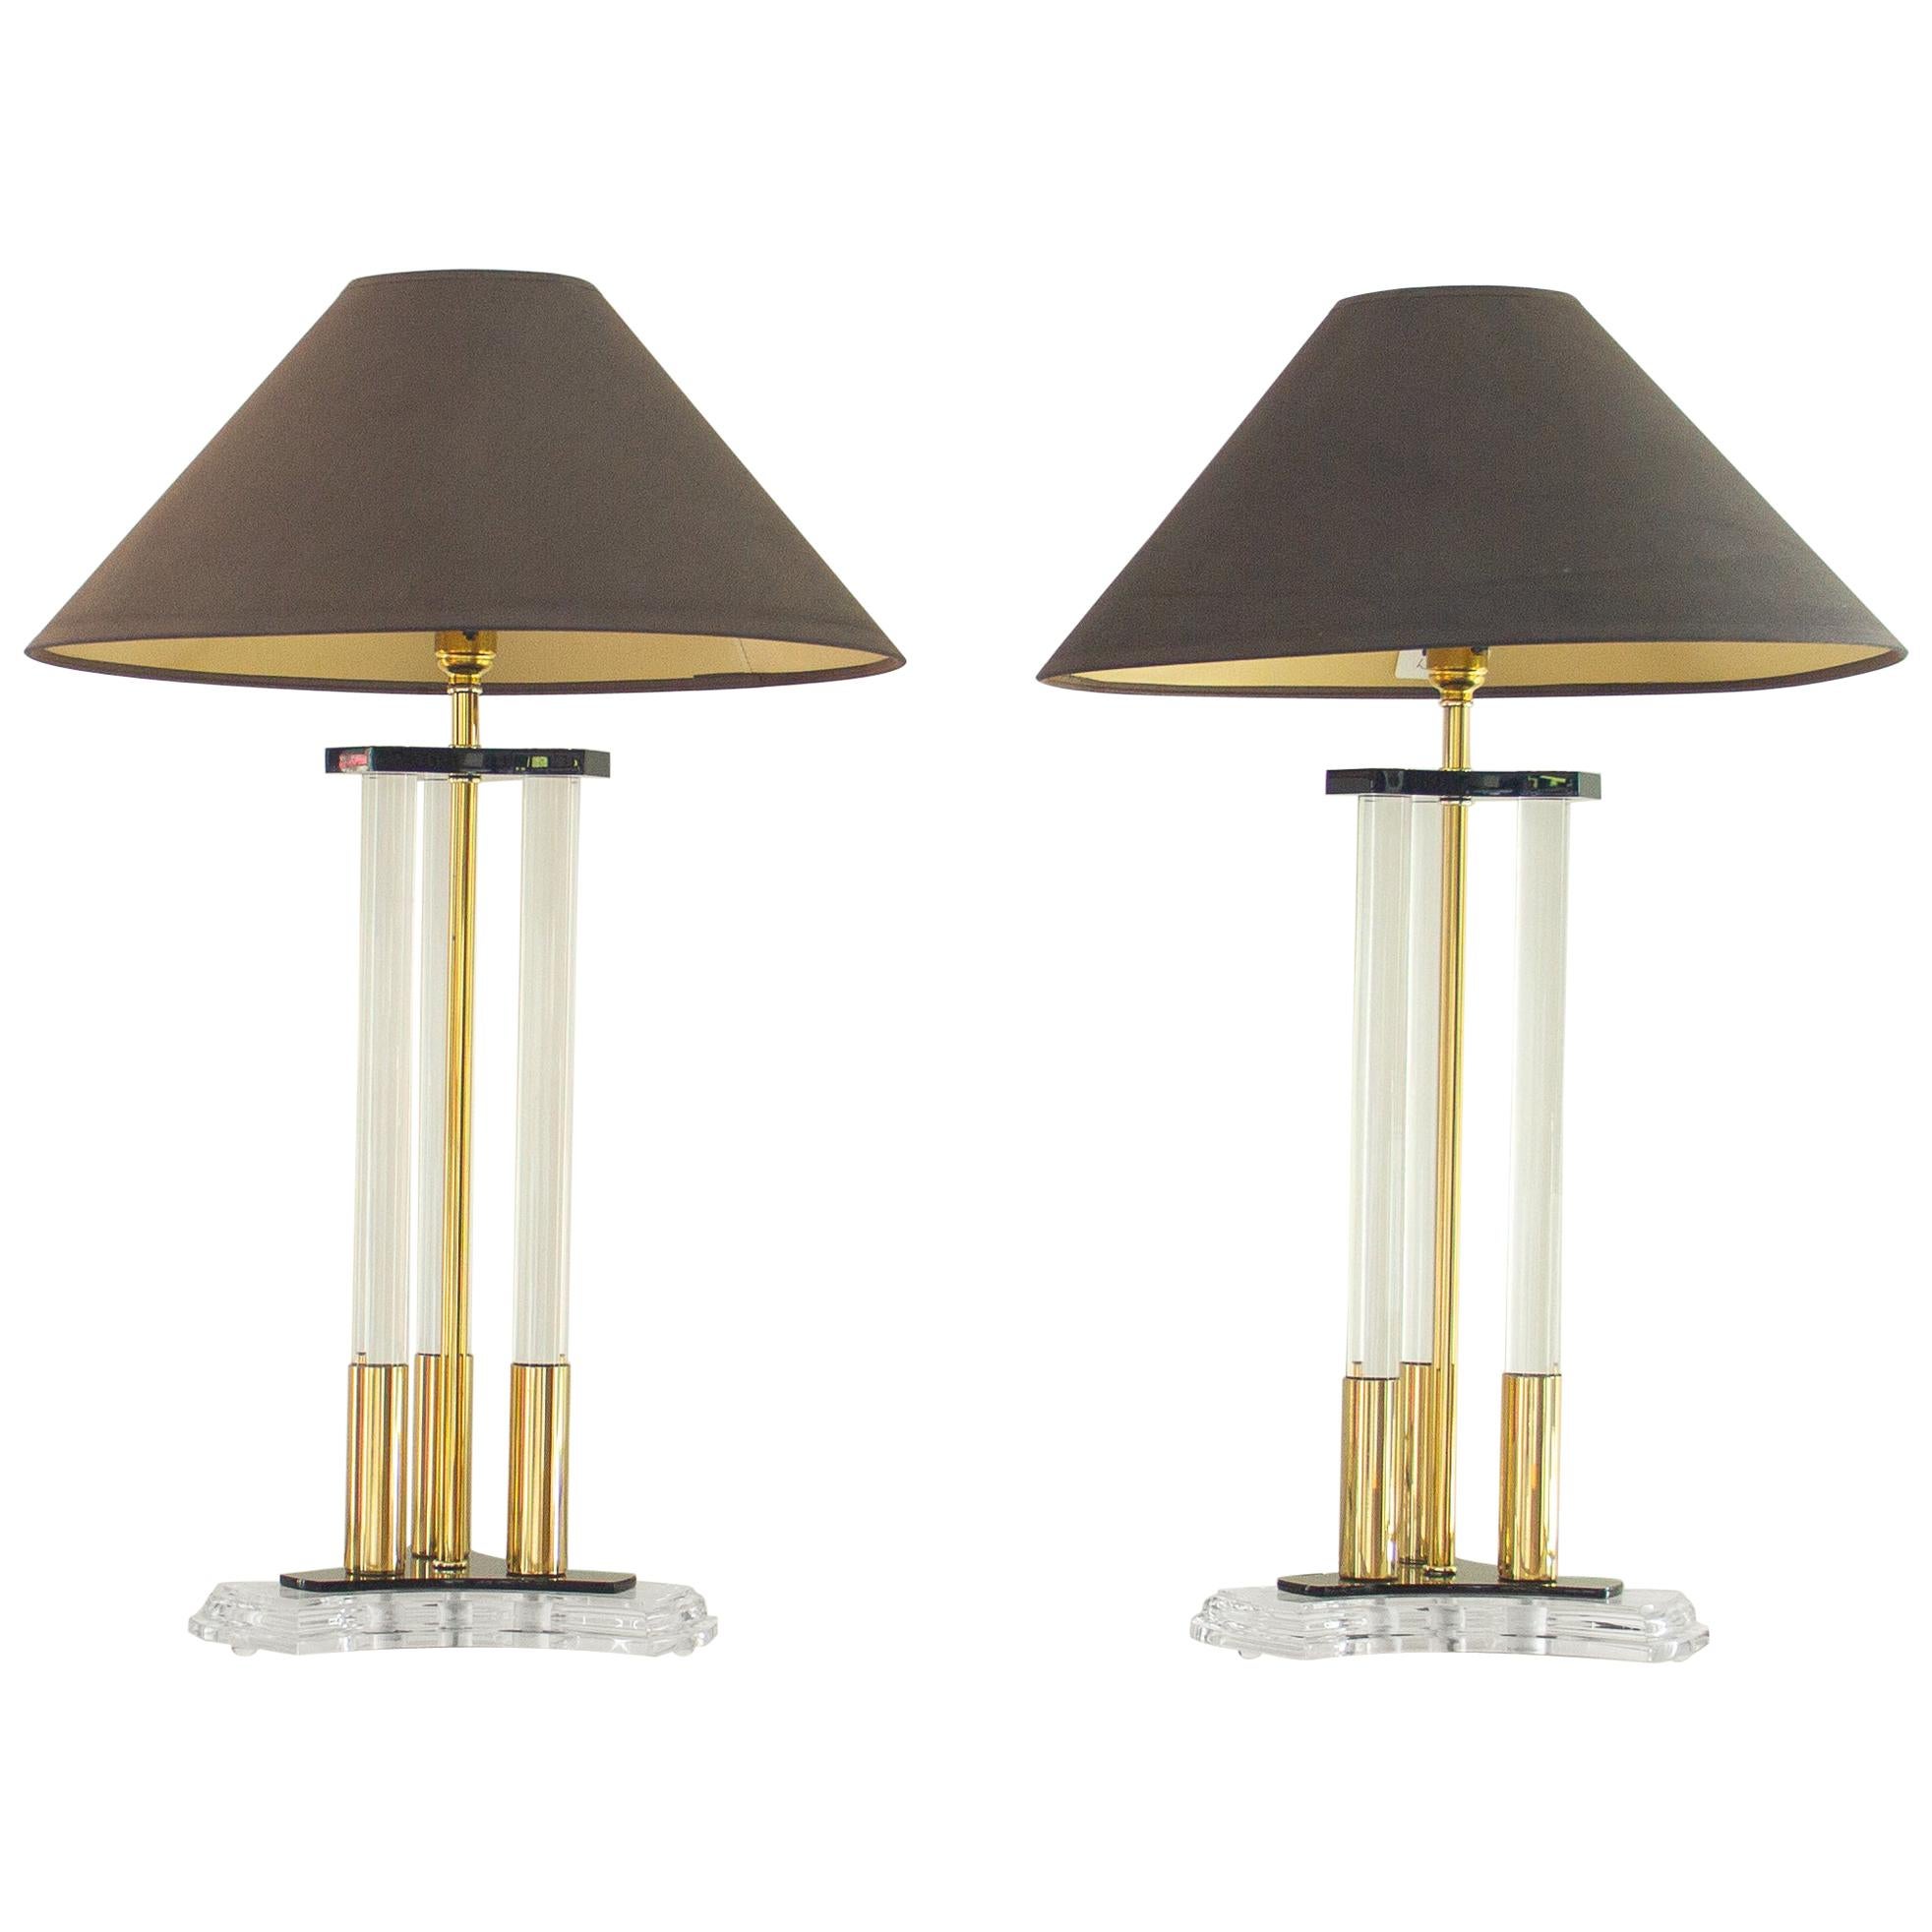 Pair of Bauer Designed Lucite and Brass Lamps, 1980s